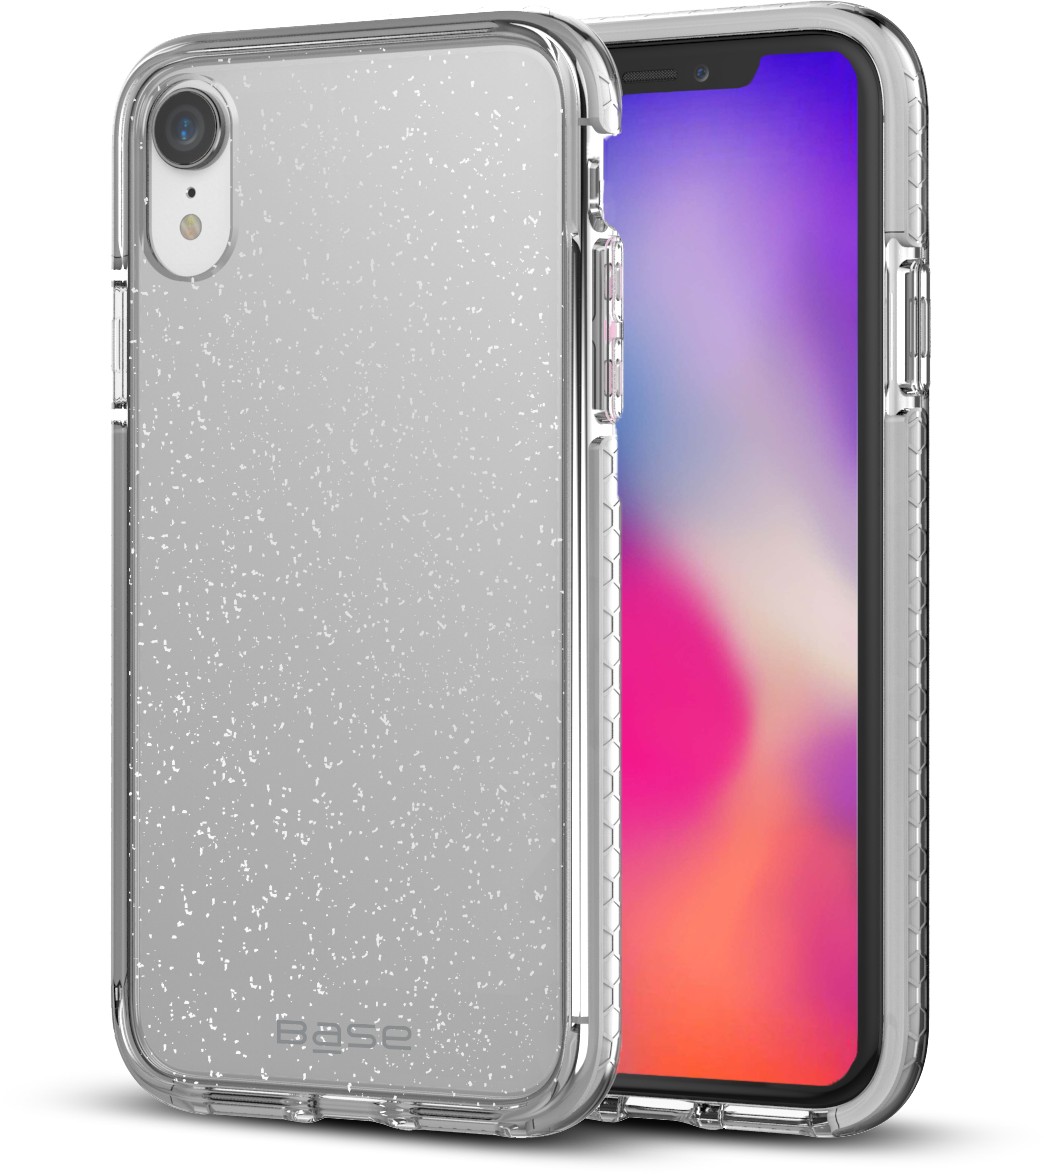 Clear case protector with silver glitter flakes and silver edges For iPhone XR cell phones